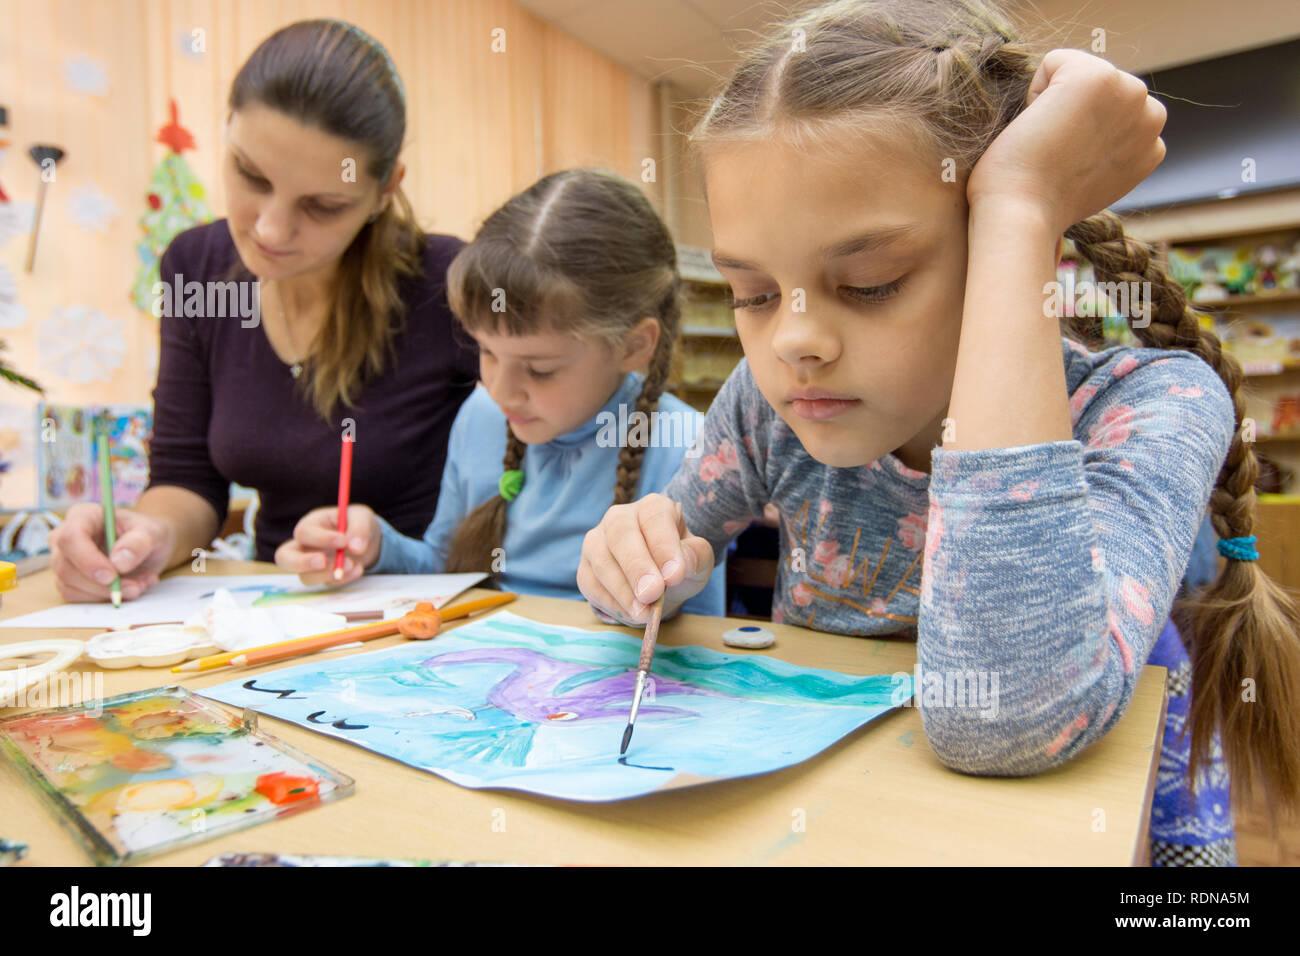 The teacher helps the students in drawing class Stock Photo